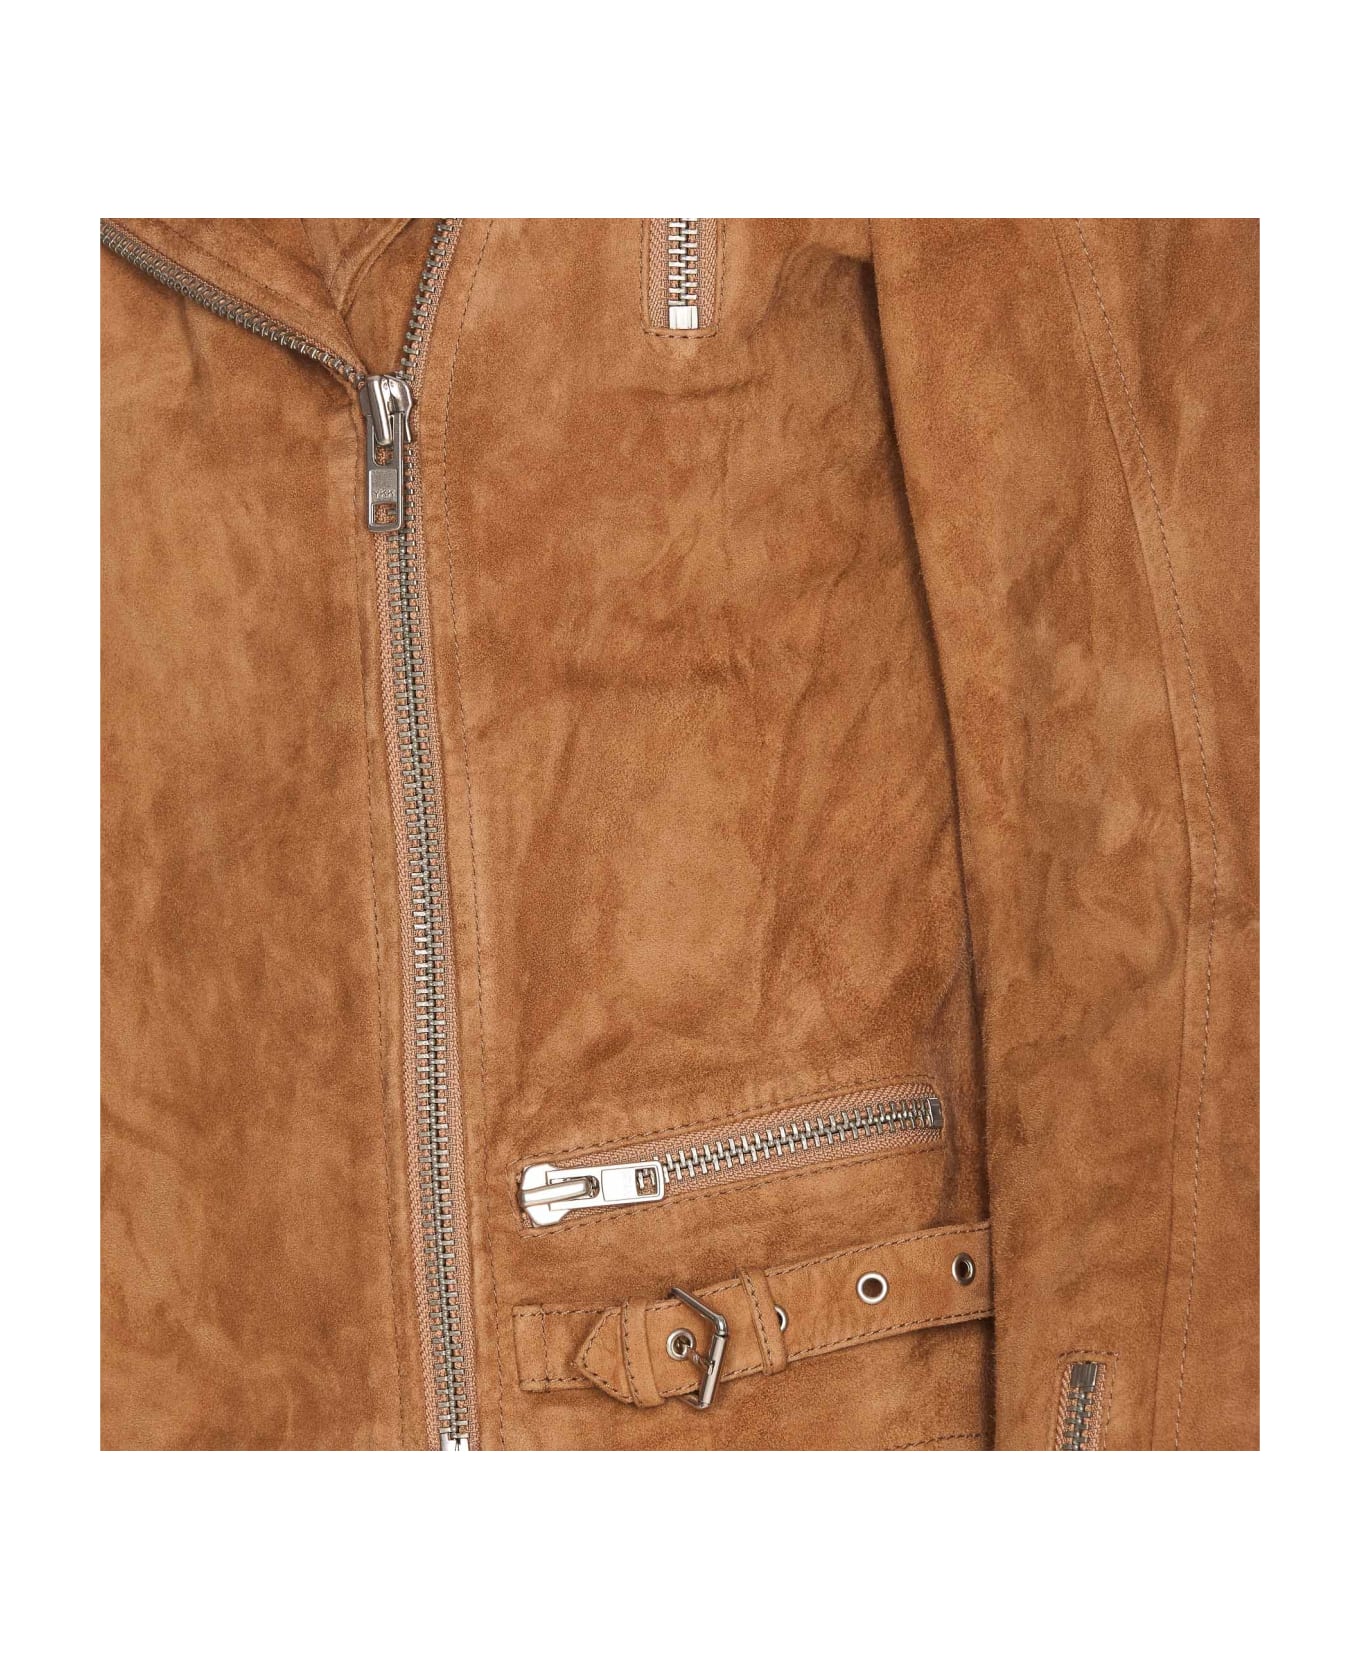 S.W.O.R.D 6.6.44 Suede Jacket - Brown